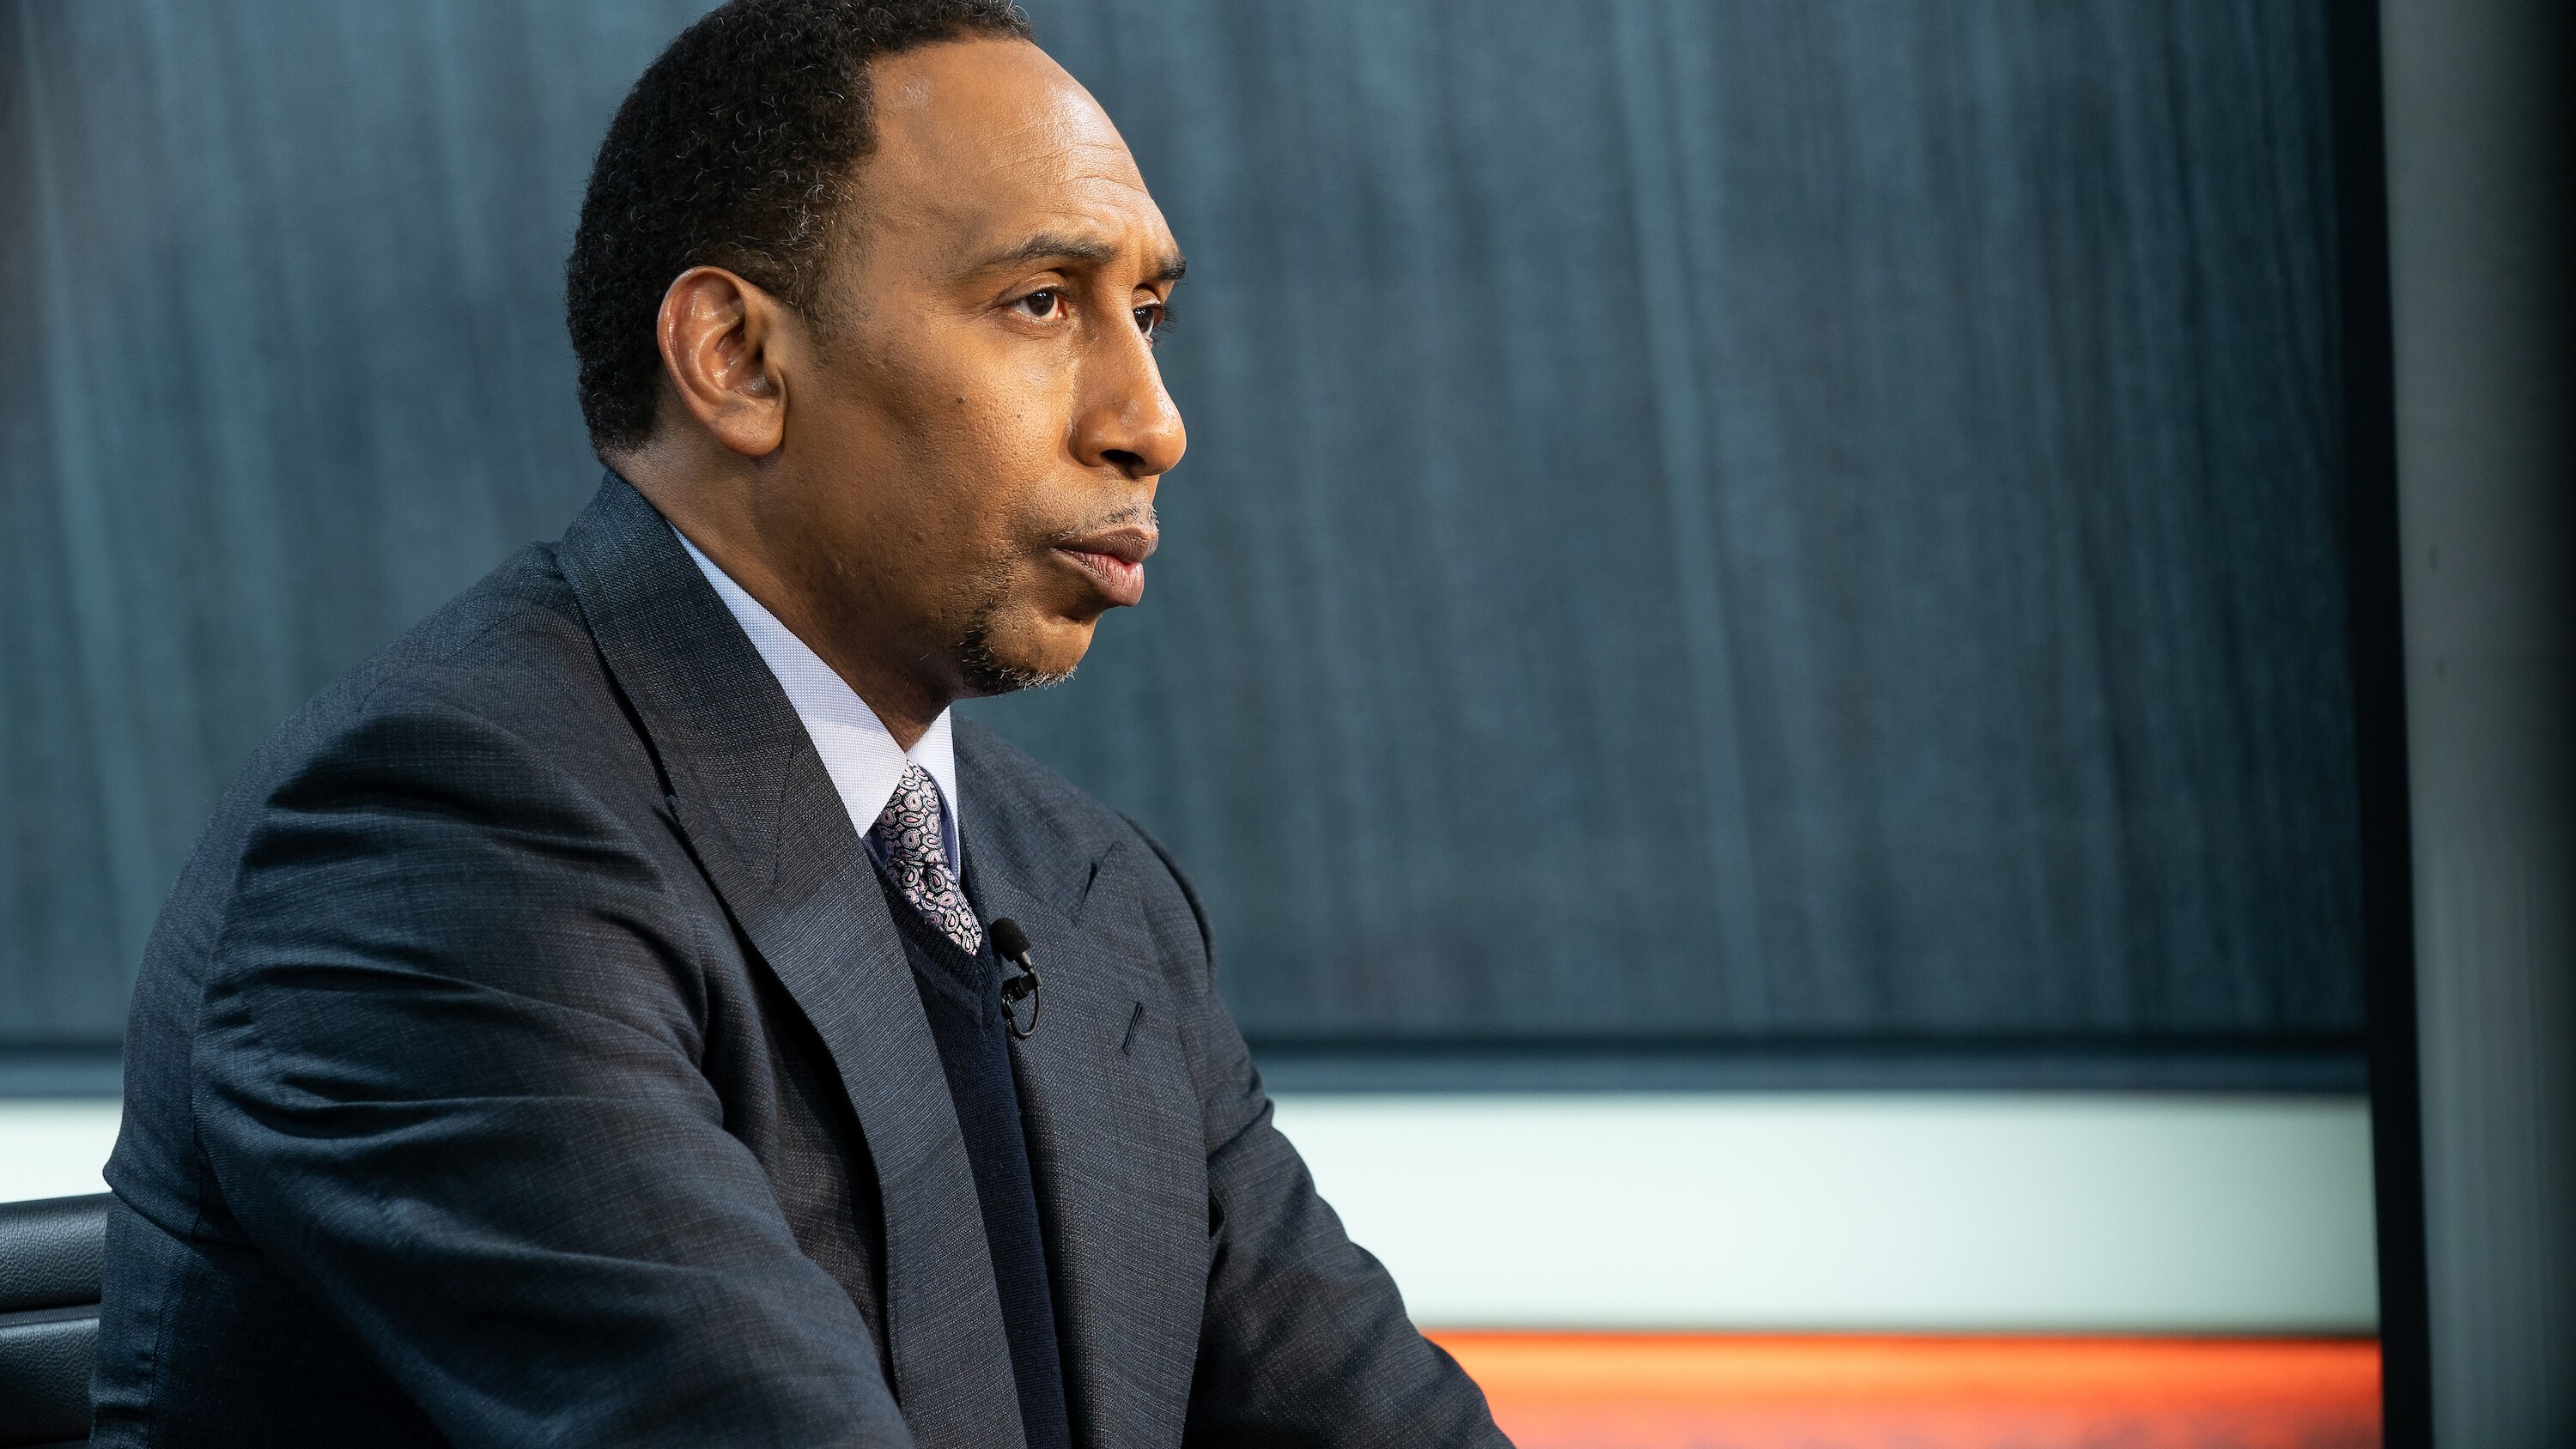 New York, NY - October 26, 2020 - South Street Seaport Studios: Stephen A. Smith on the set of First Take. (Photo by Kelly Backus / ESPN Images)